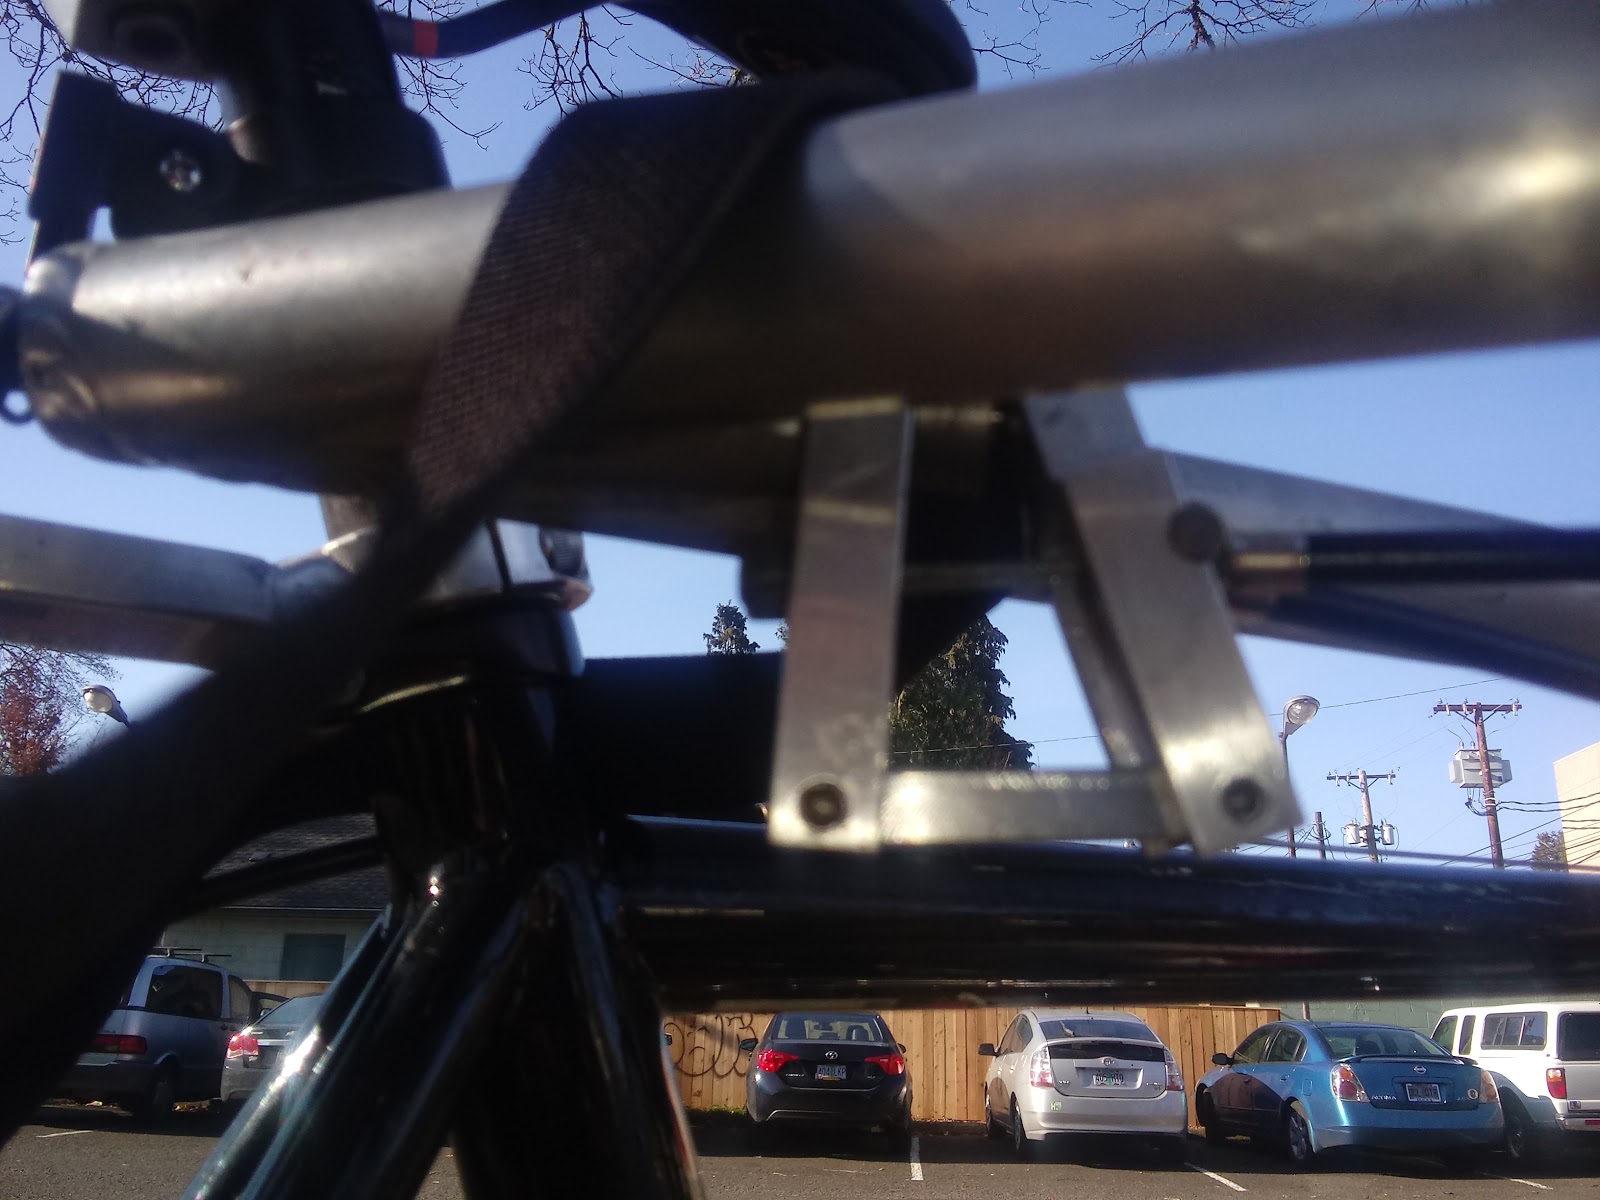 Kent's Bike Blog: A Cycle Tote Trailer with Auto-braking